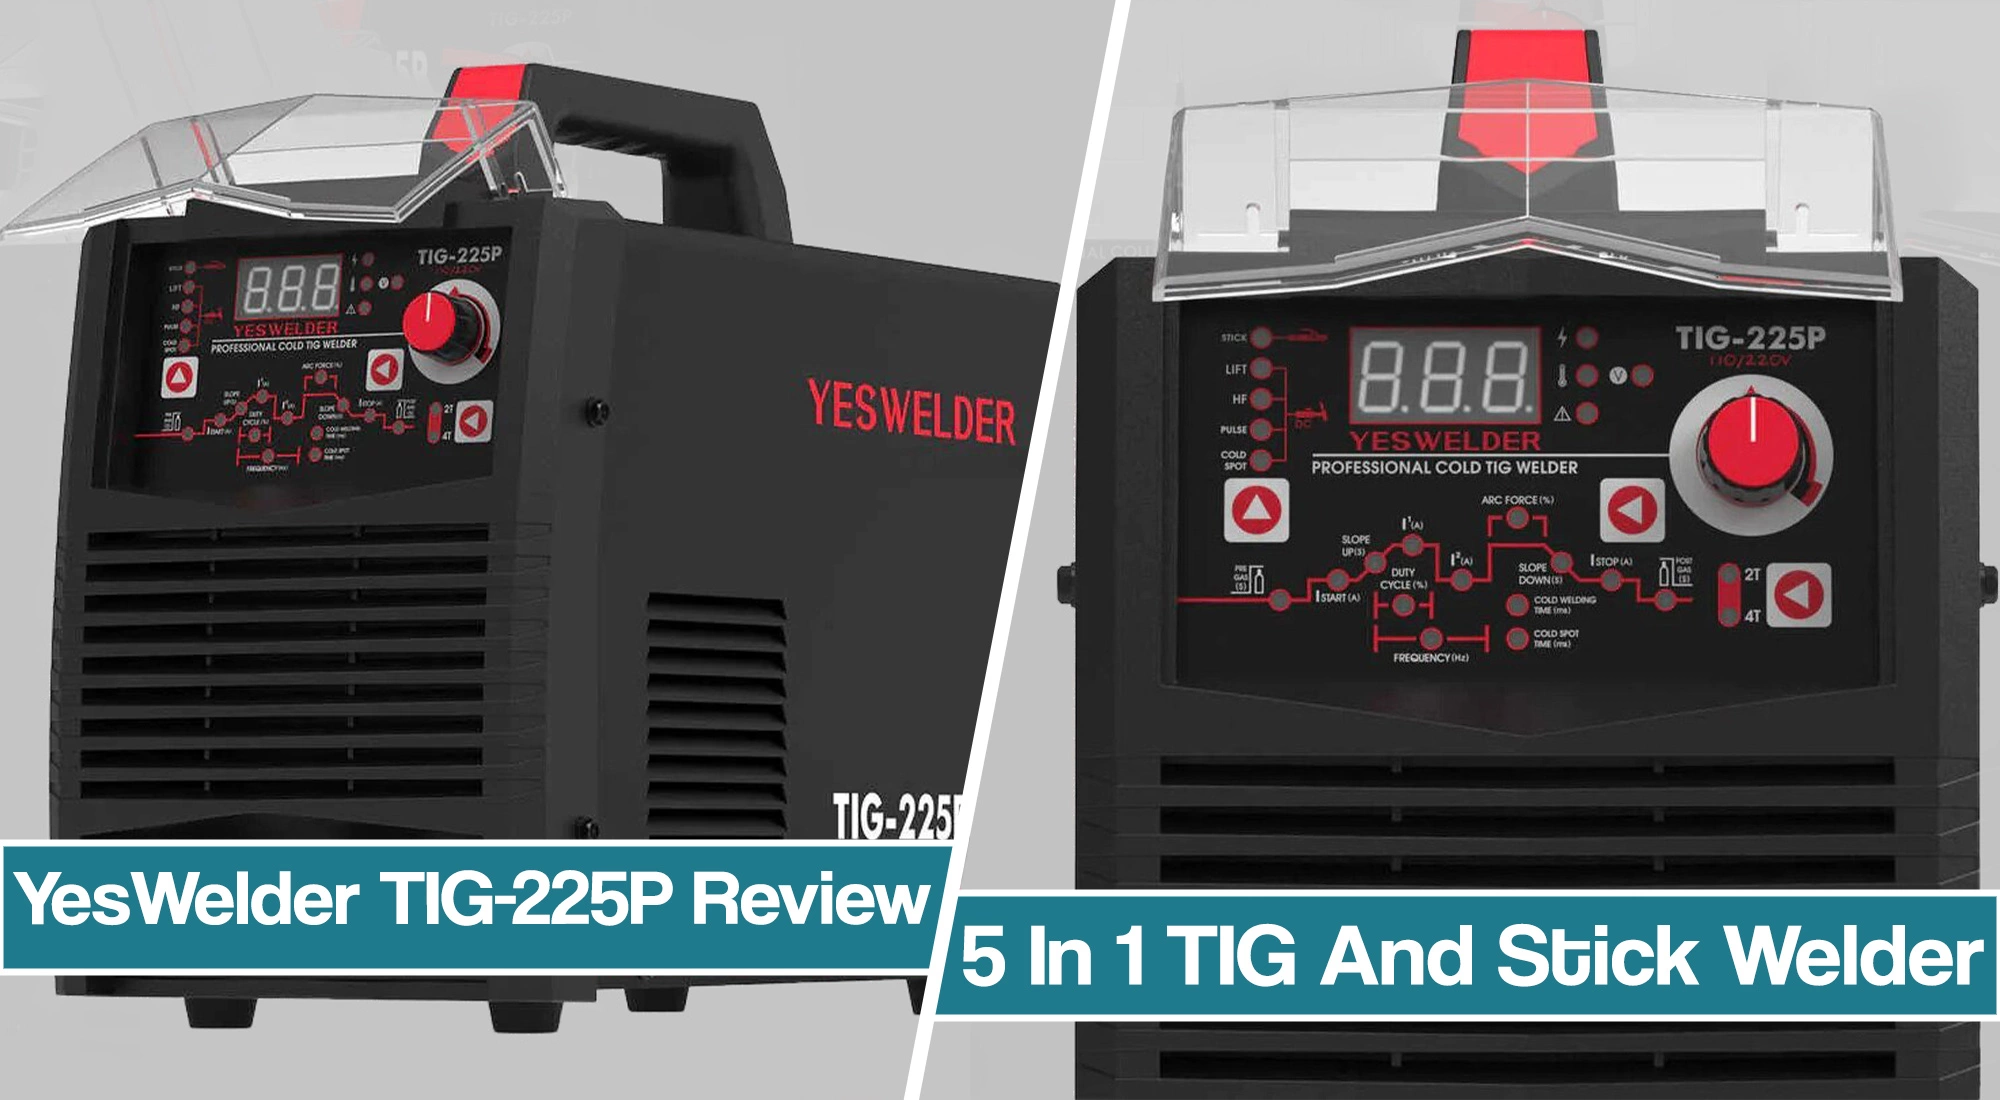 YesWelder TIG-225P Review – TIG Welder With Cold Spot/high-frequency